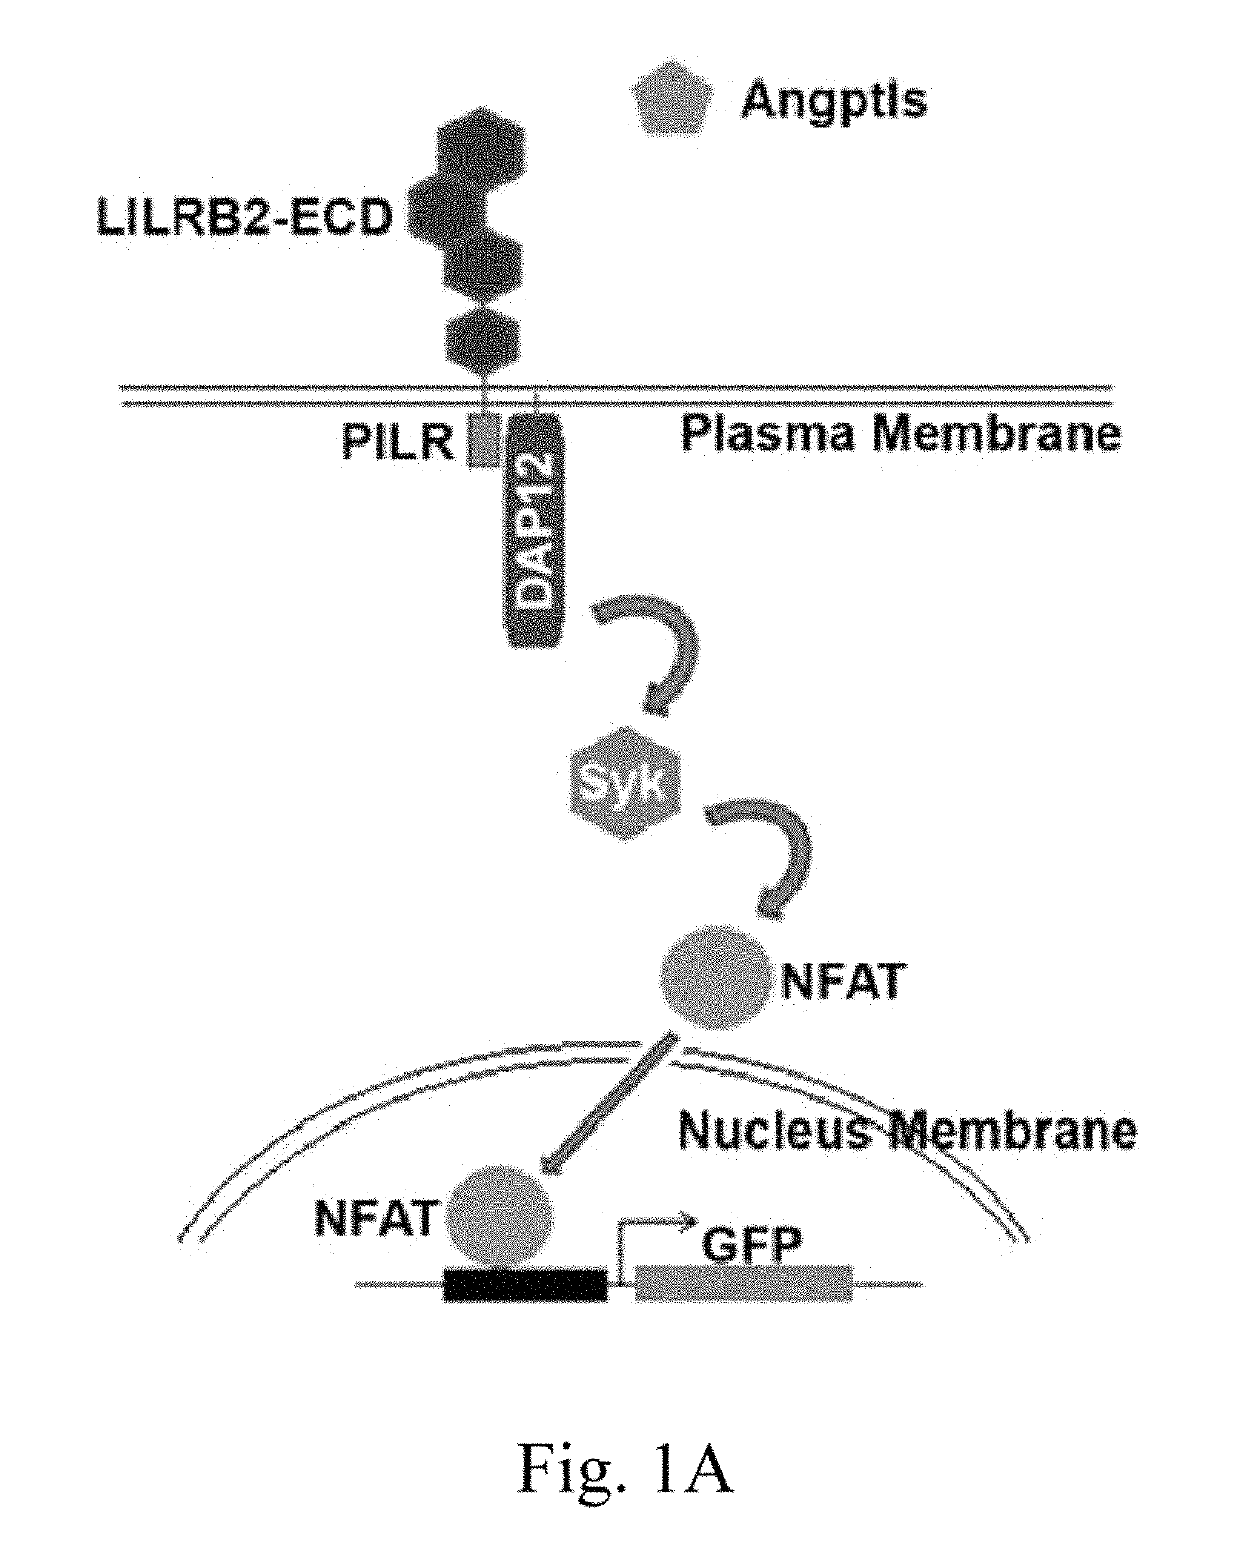 LILRB2 and notch-mediated expansion of hematopoietic precursor cells